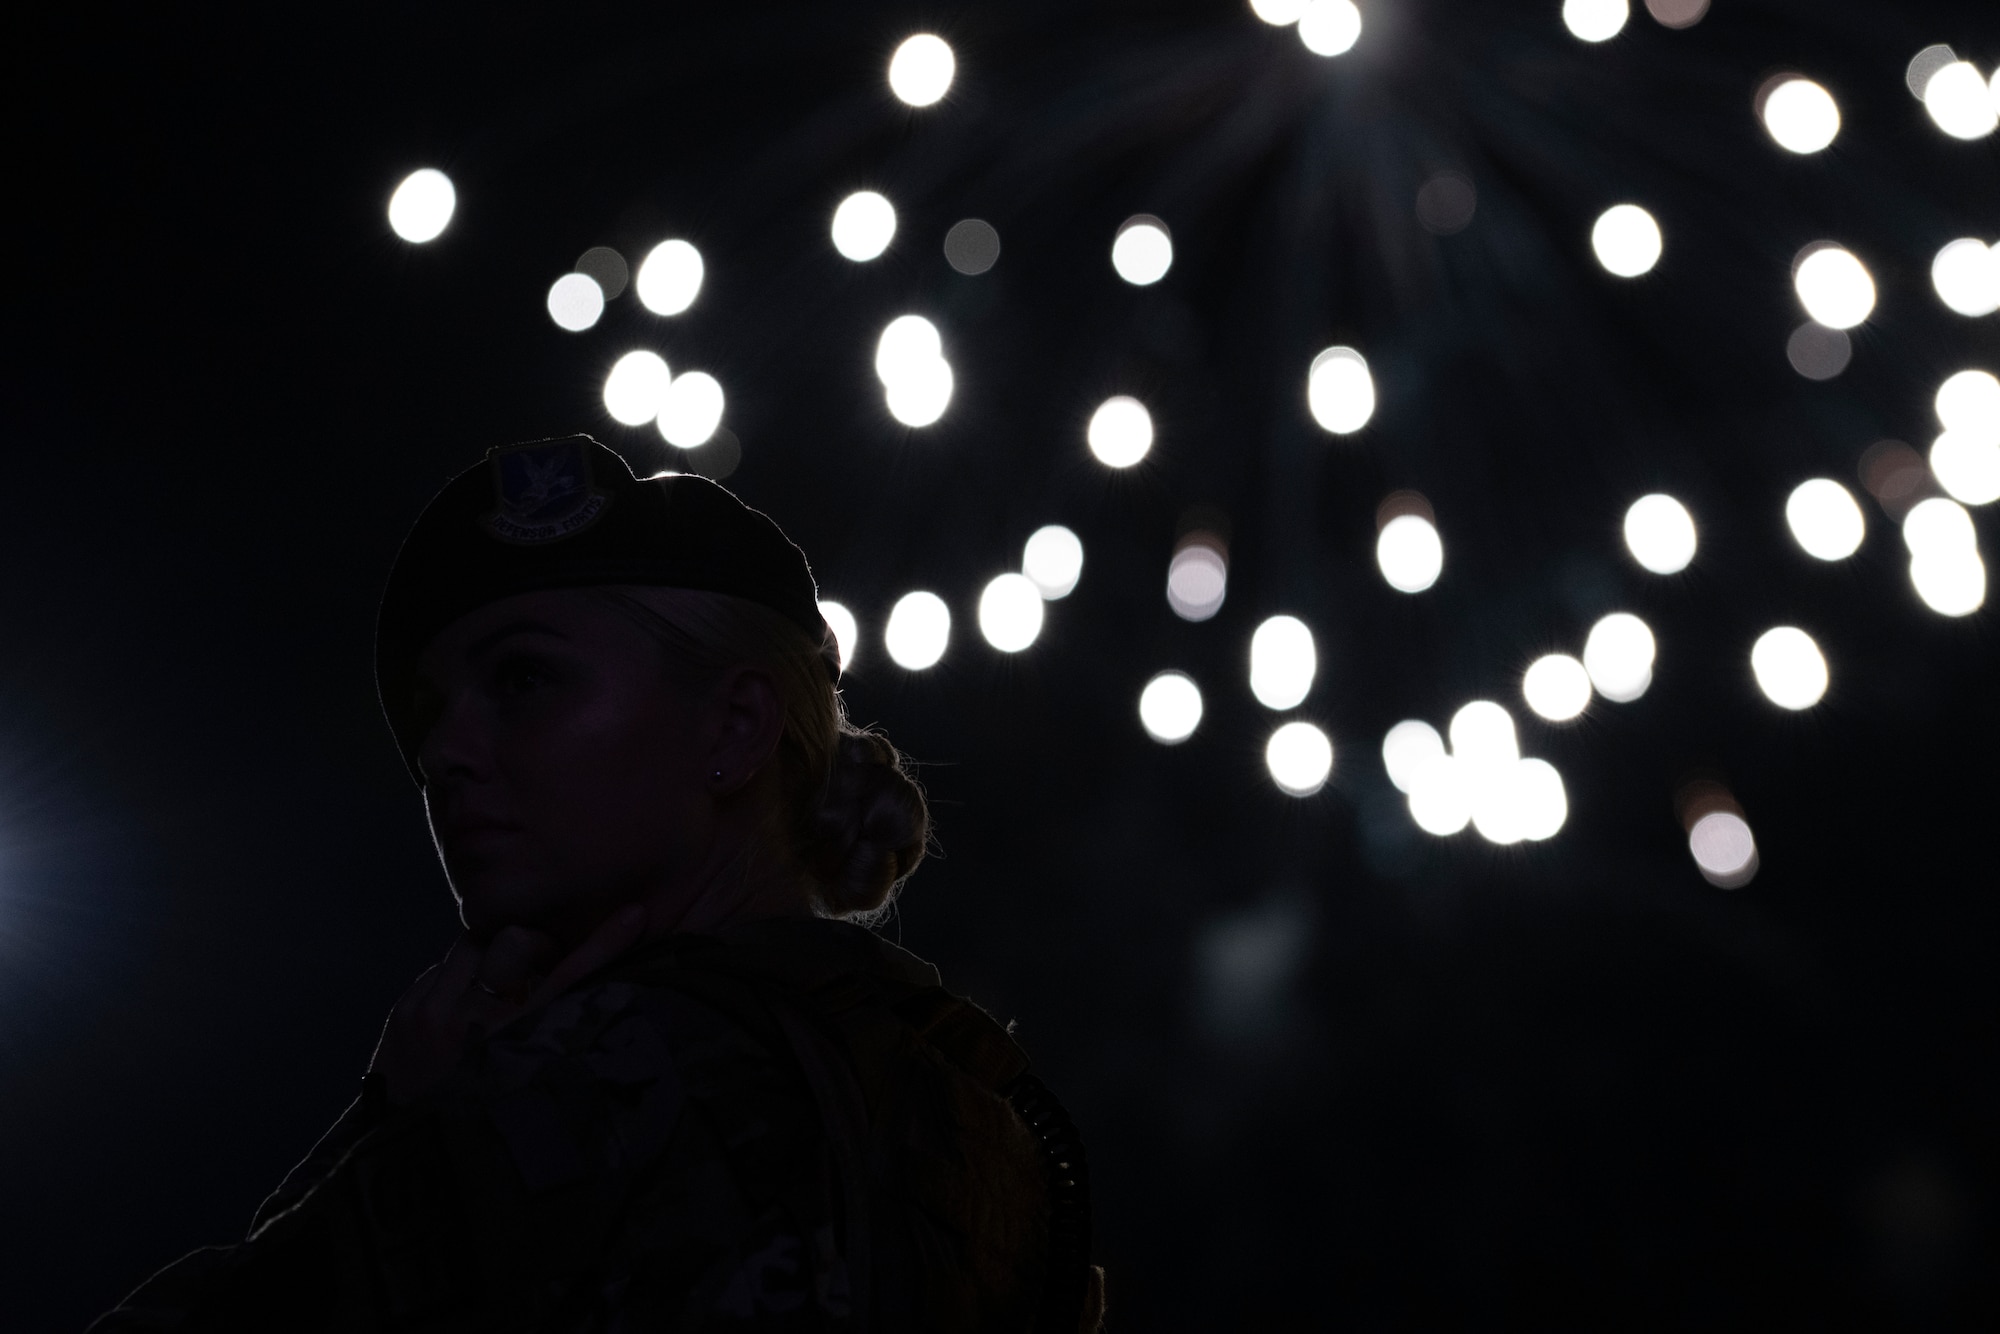 An Airman assigned to the 20th Security Forces Squadron (SFS) turns to look at a crowd during a fireworks display at the 20th Force Support Squadron’s annual Freedom Bash at Shaw Air Force Base, South Carolina, June 29, 2019.